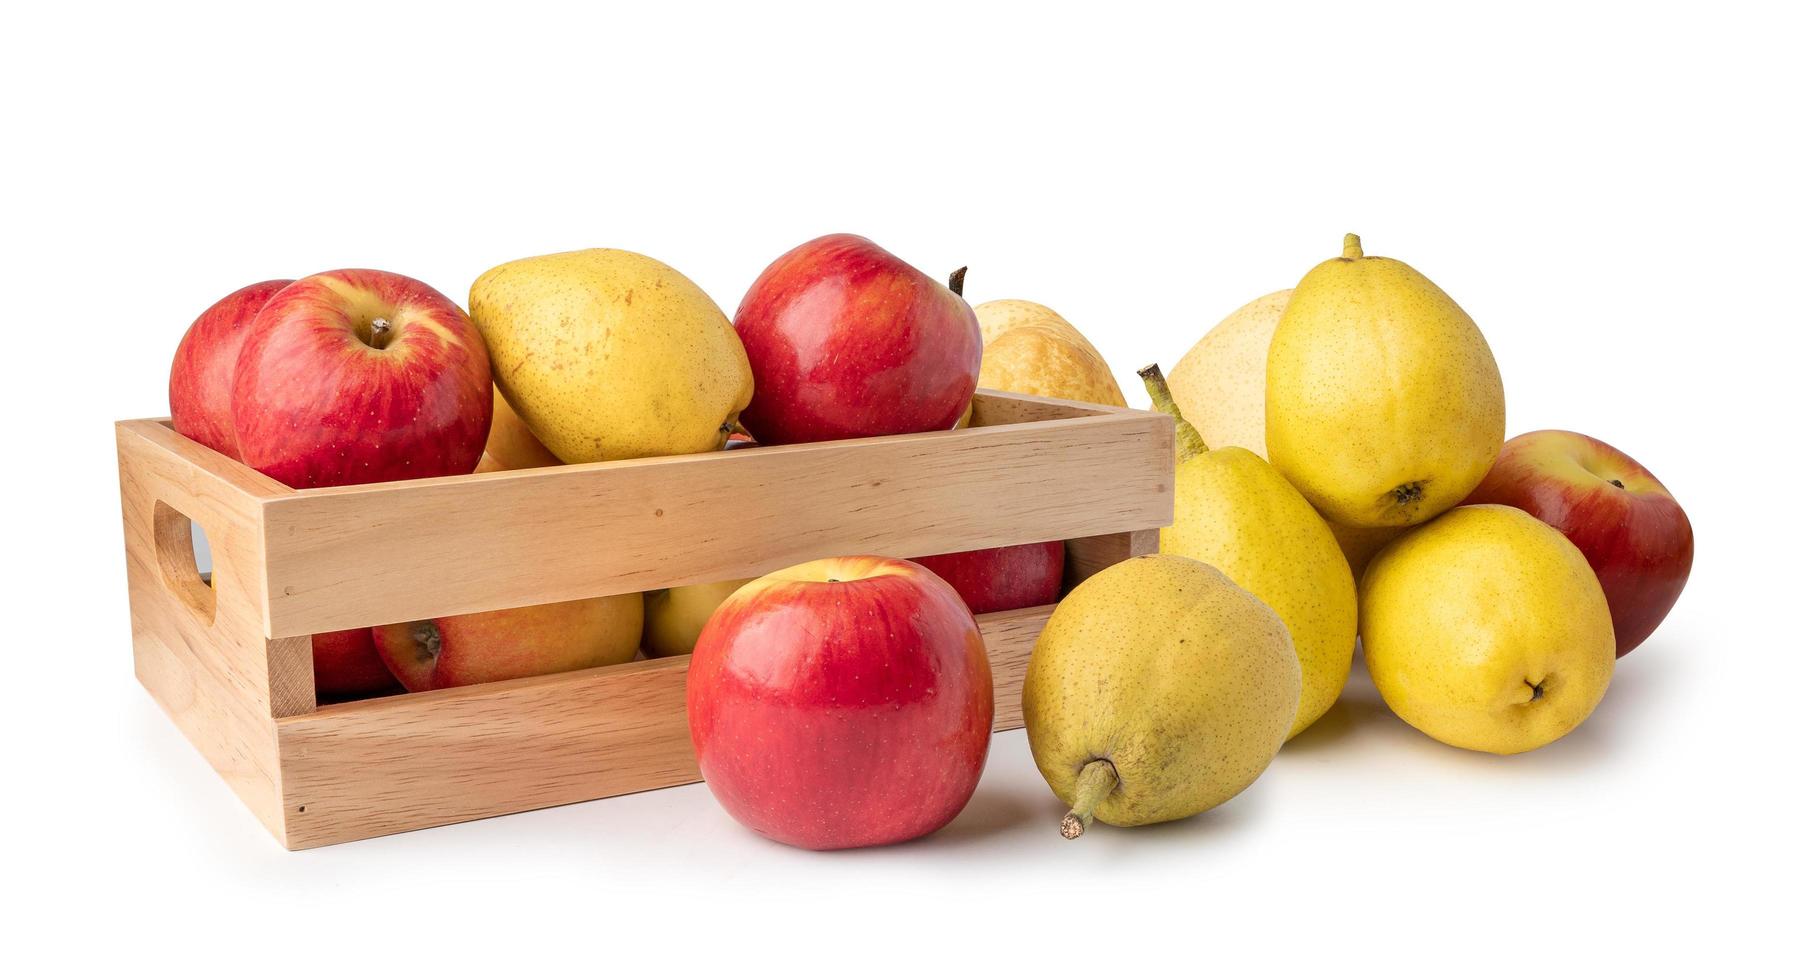 Apple and Scented pears fruit in wooden box isolate on white background. photo